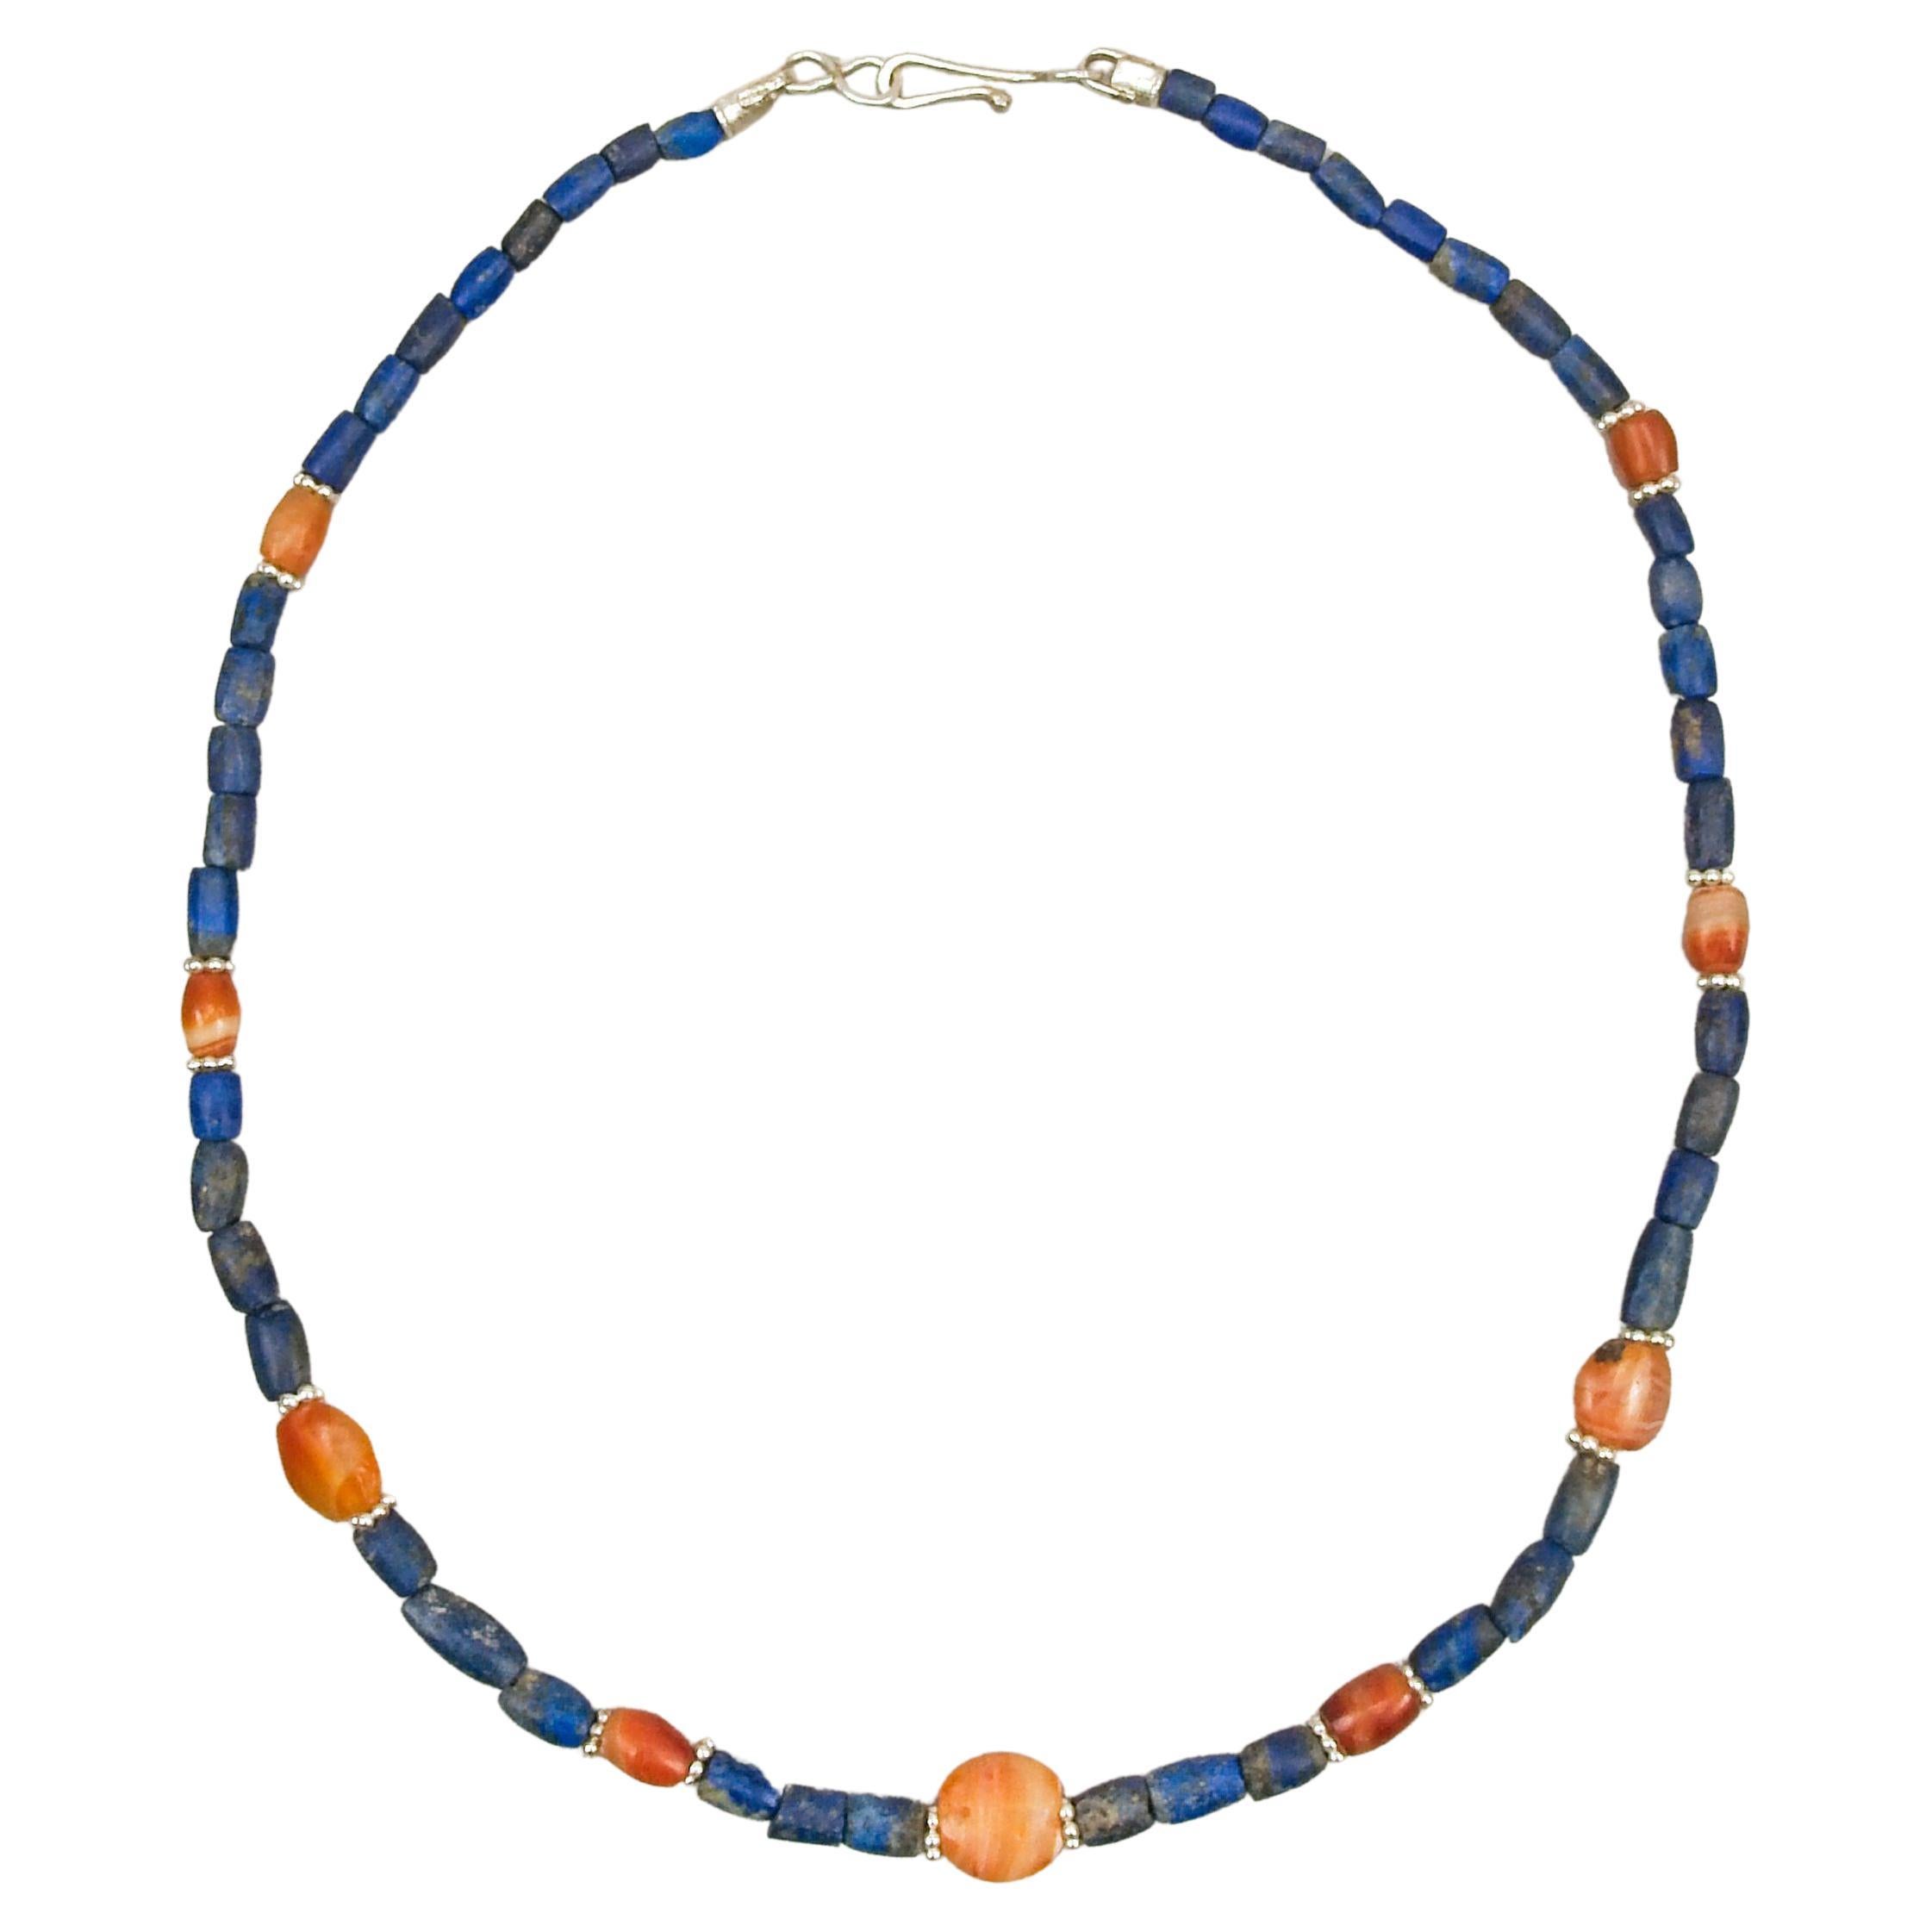 Ancient Lapis Lazuli Beads with Carnelian and Granulated Silver Ring Beads For Sale